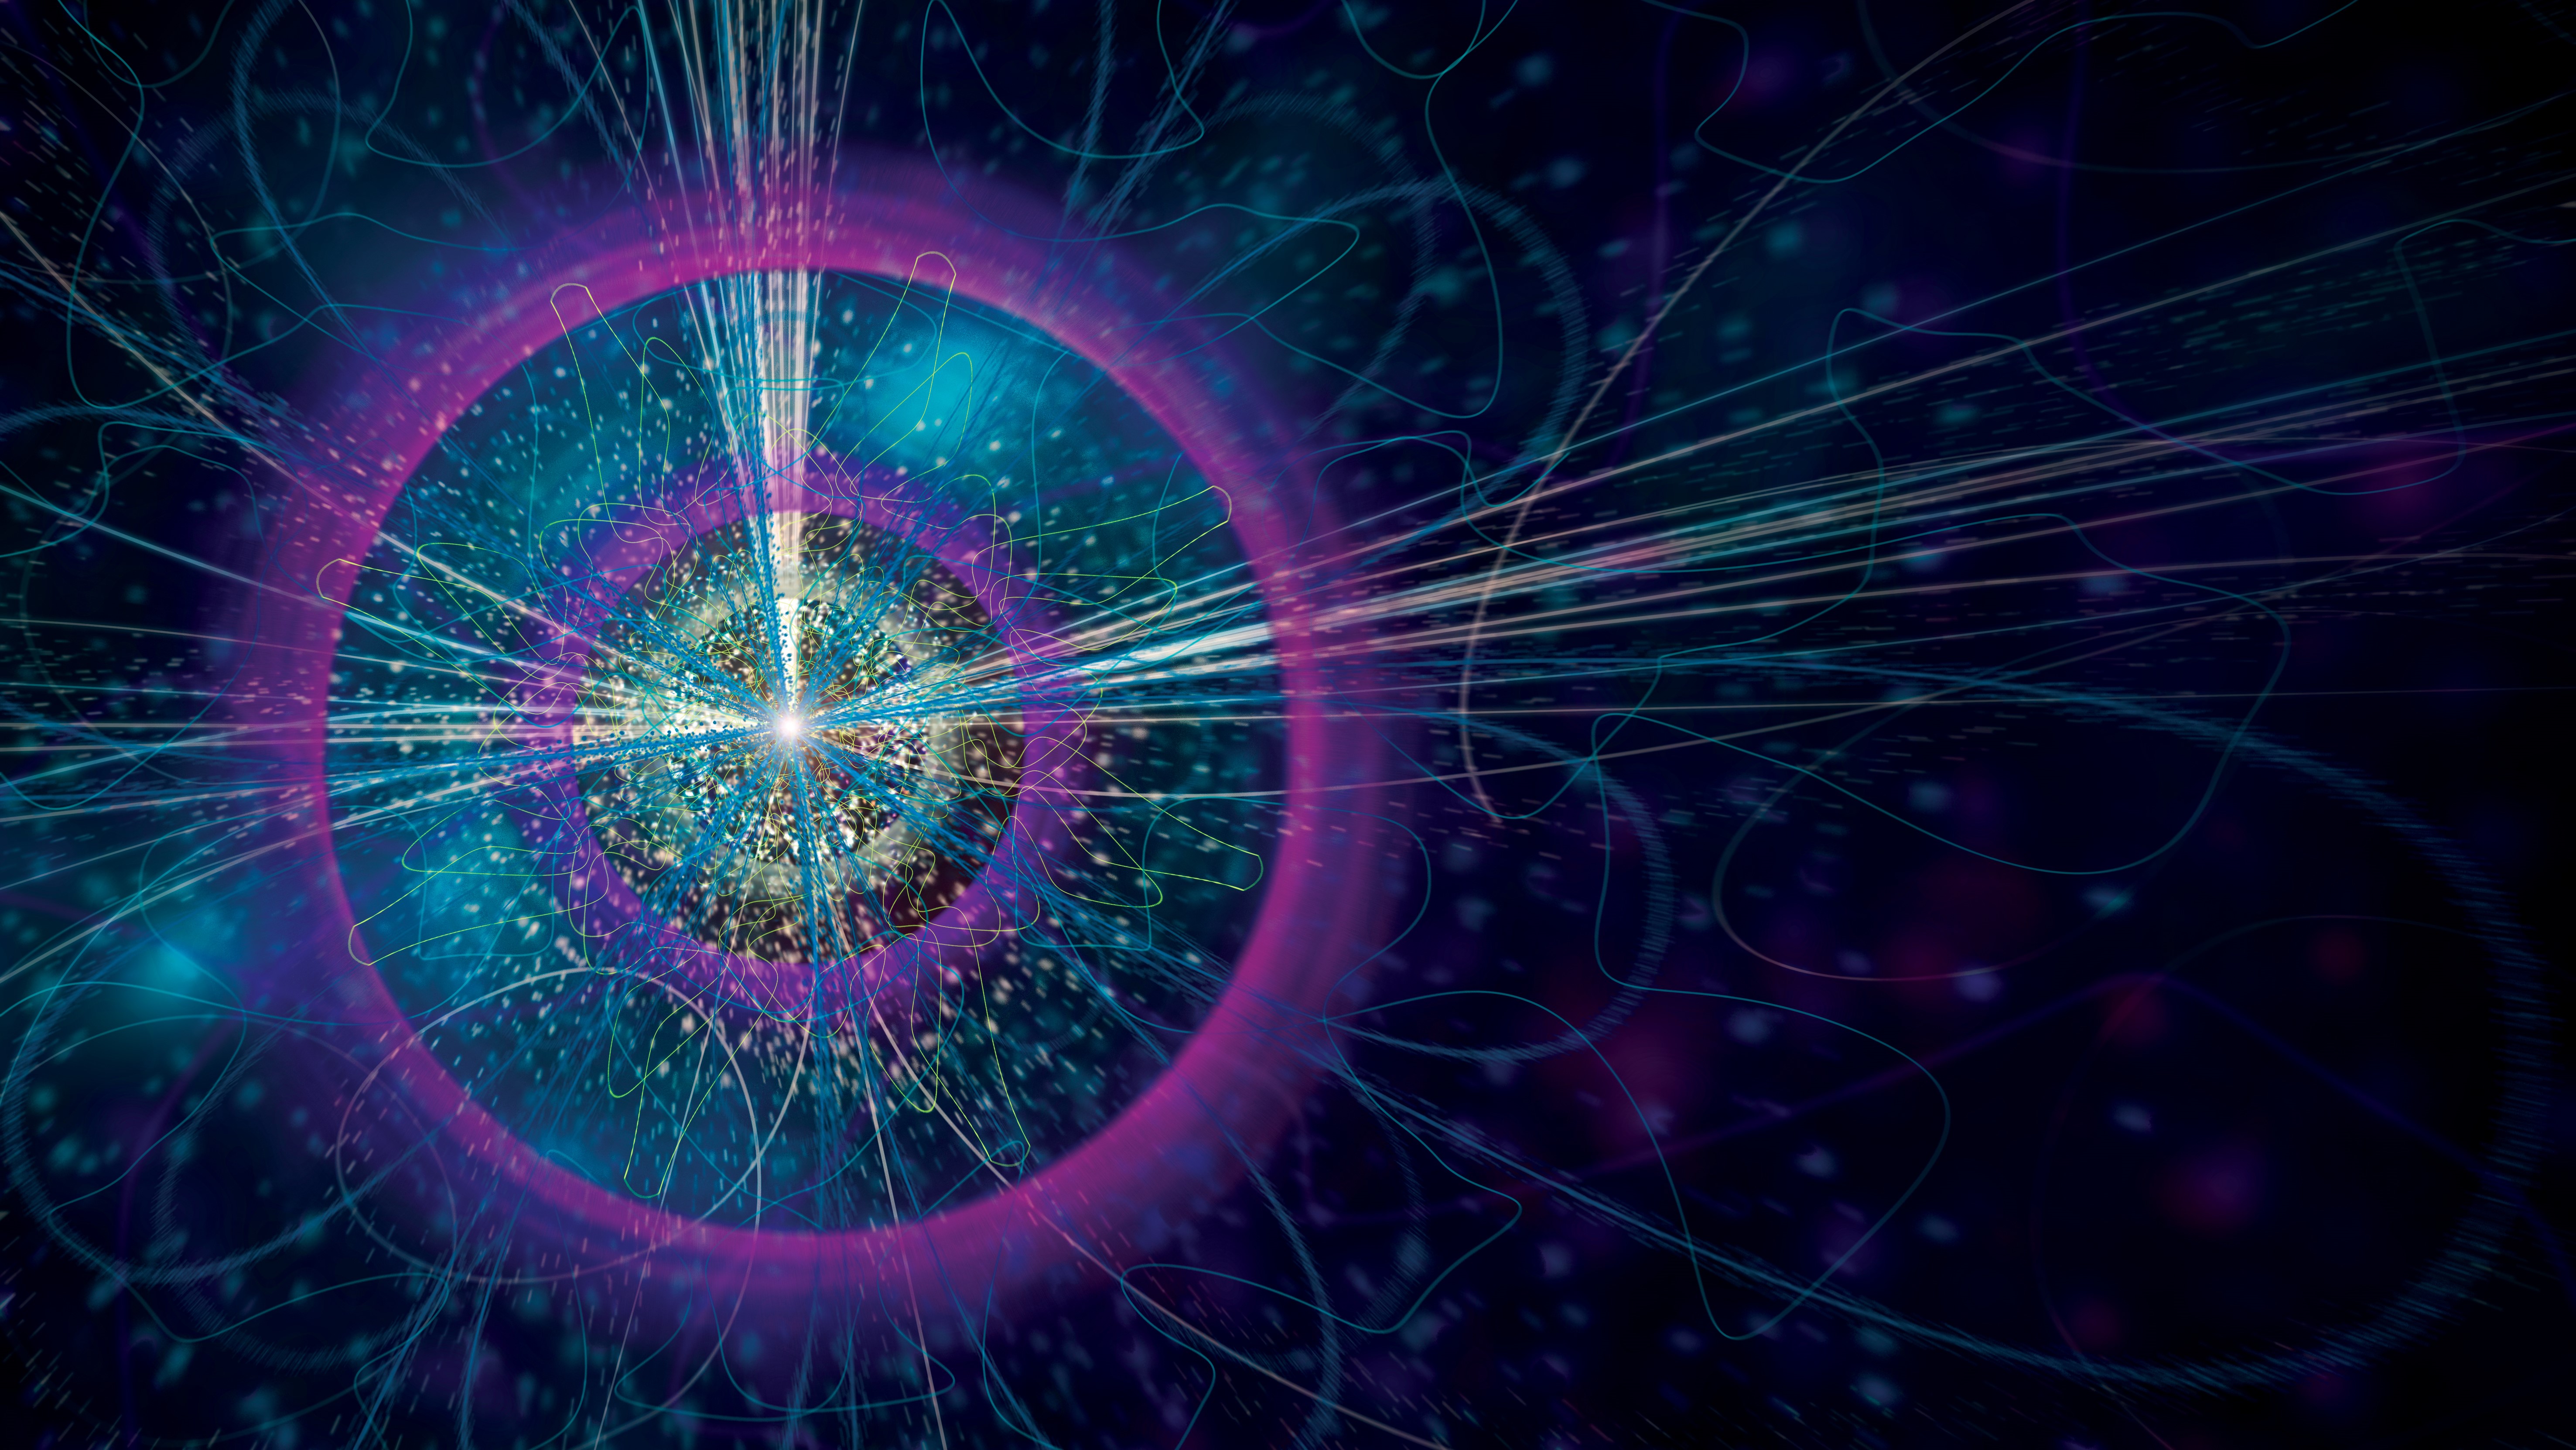 Higgs boson, discovered 10 years ago, continues to fascinate